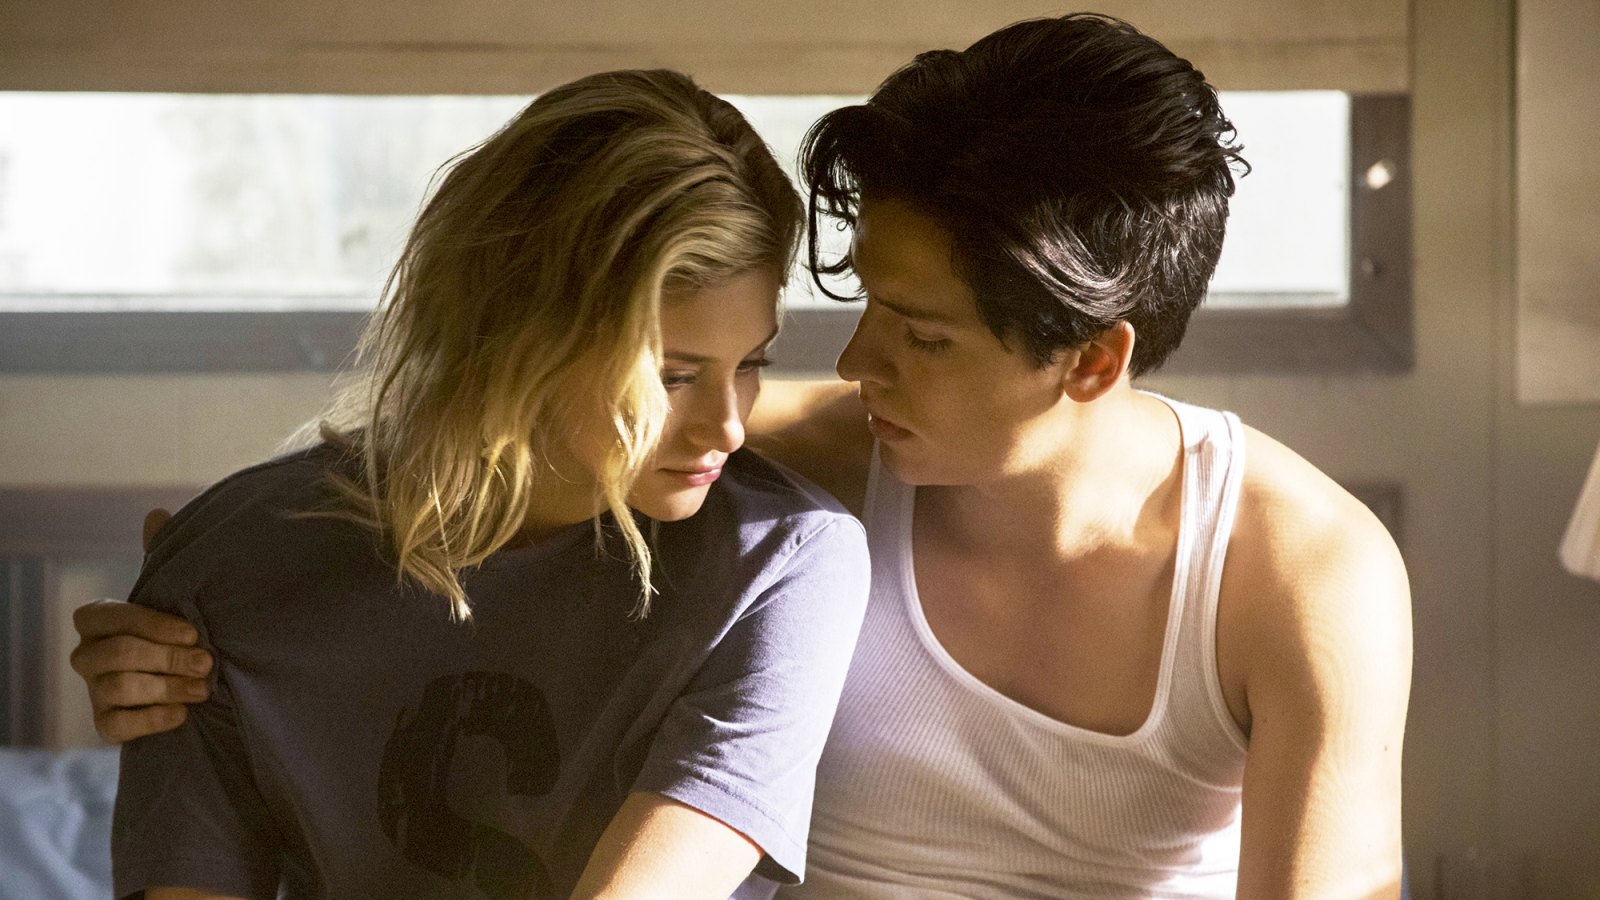 Lili Reinhart as Betty Cooper and Cole Sprouse as Jughead Jones on ‘Riverdale‘